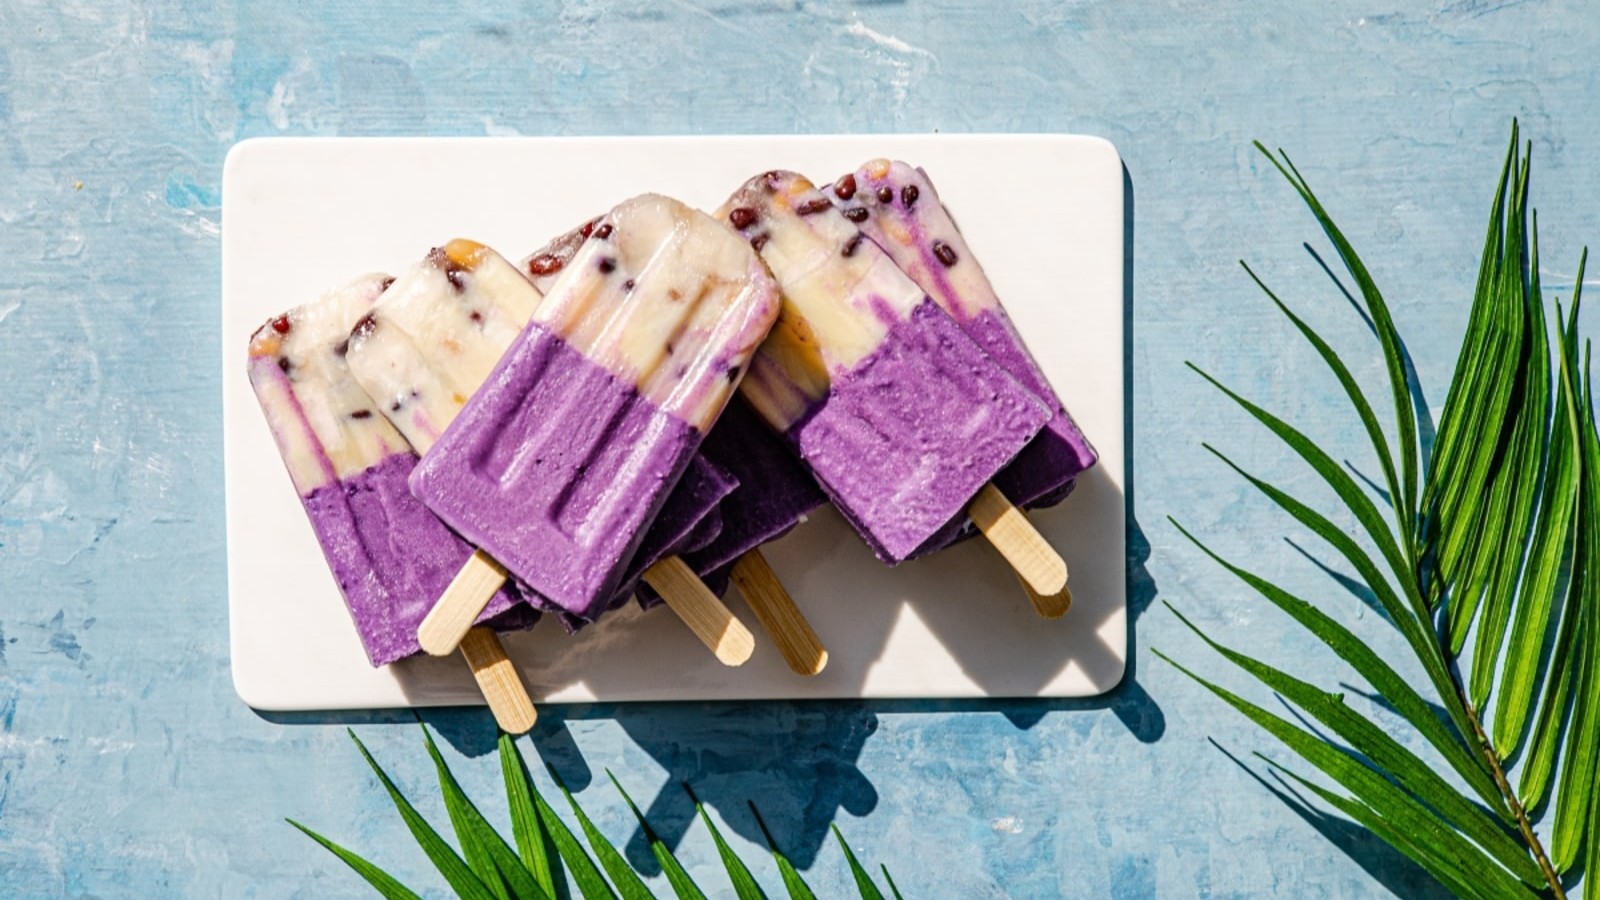 Image of Halo-Halo Popsicles